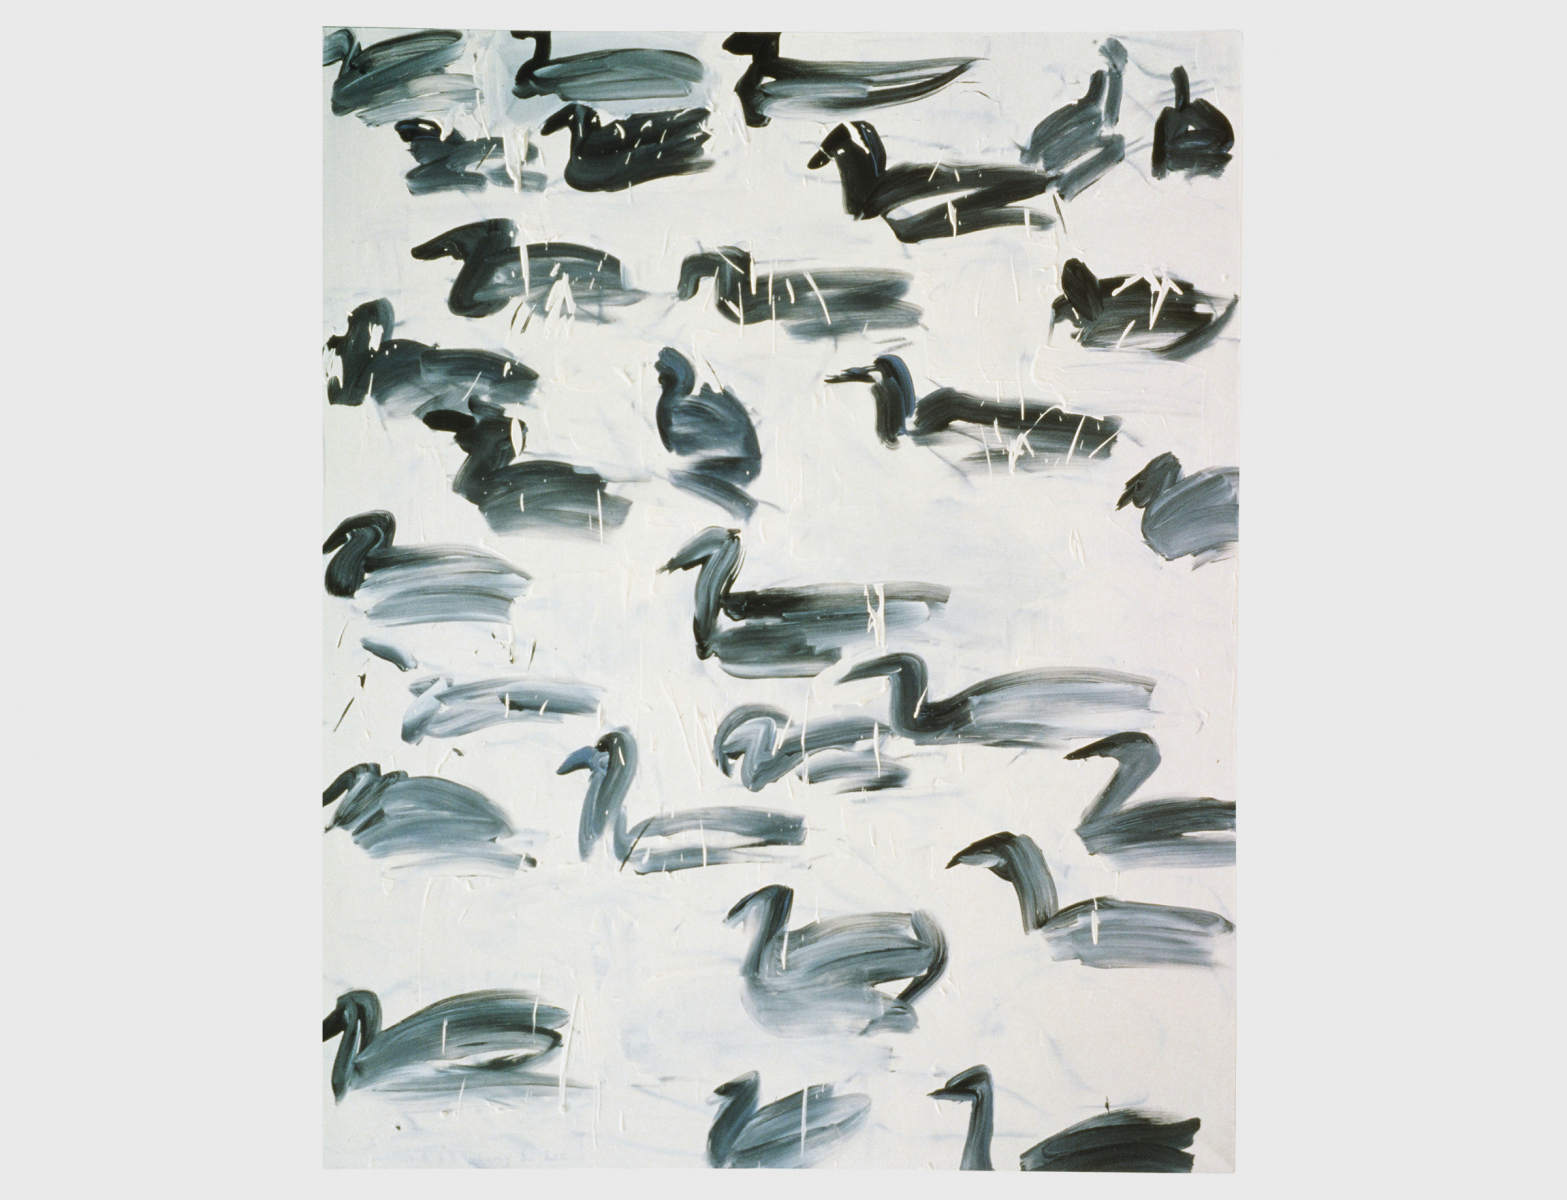 Untitled-88006, 1988, Oil on Canvas, 130x160cm